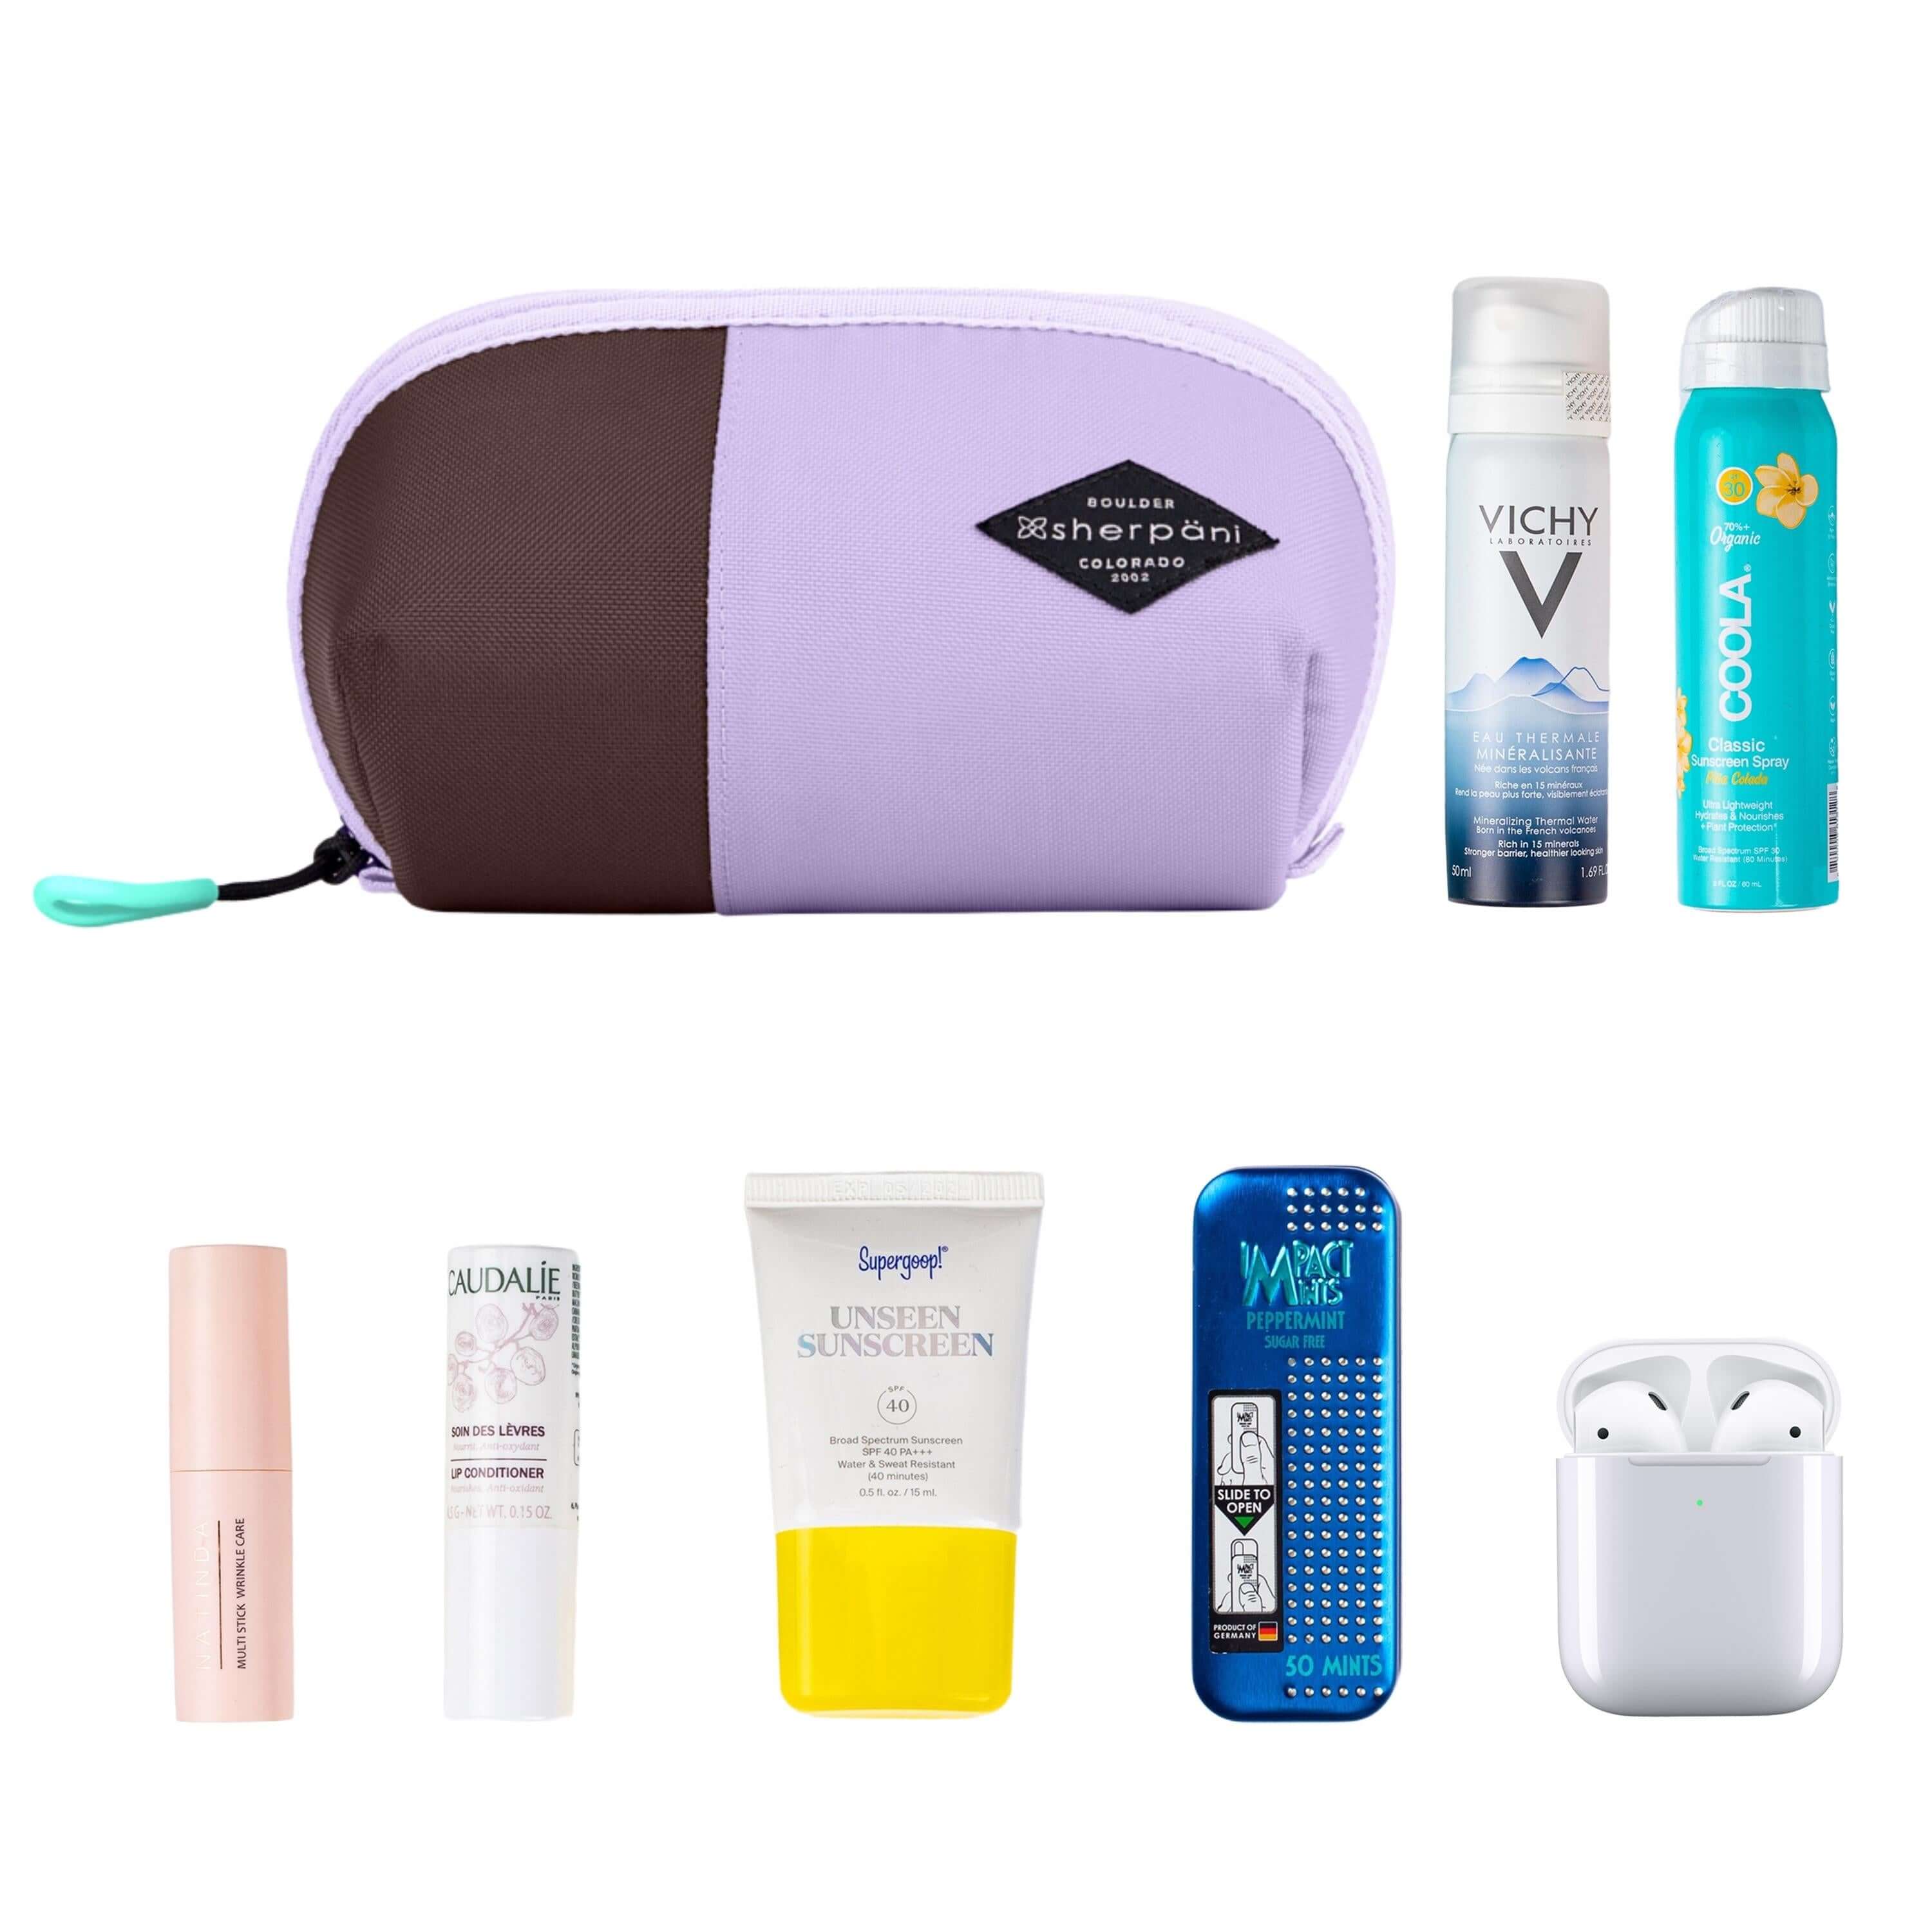 Top view of example items to fill the bag. Sherpani travel accessory, the Harmony in Lavender, is shown in the upper left corner. It is surrounded by an assortment of items: beauty products, skincare products, sunscreen, mints and AirPods.